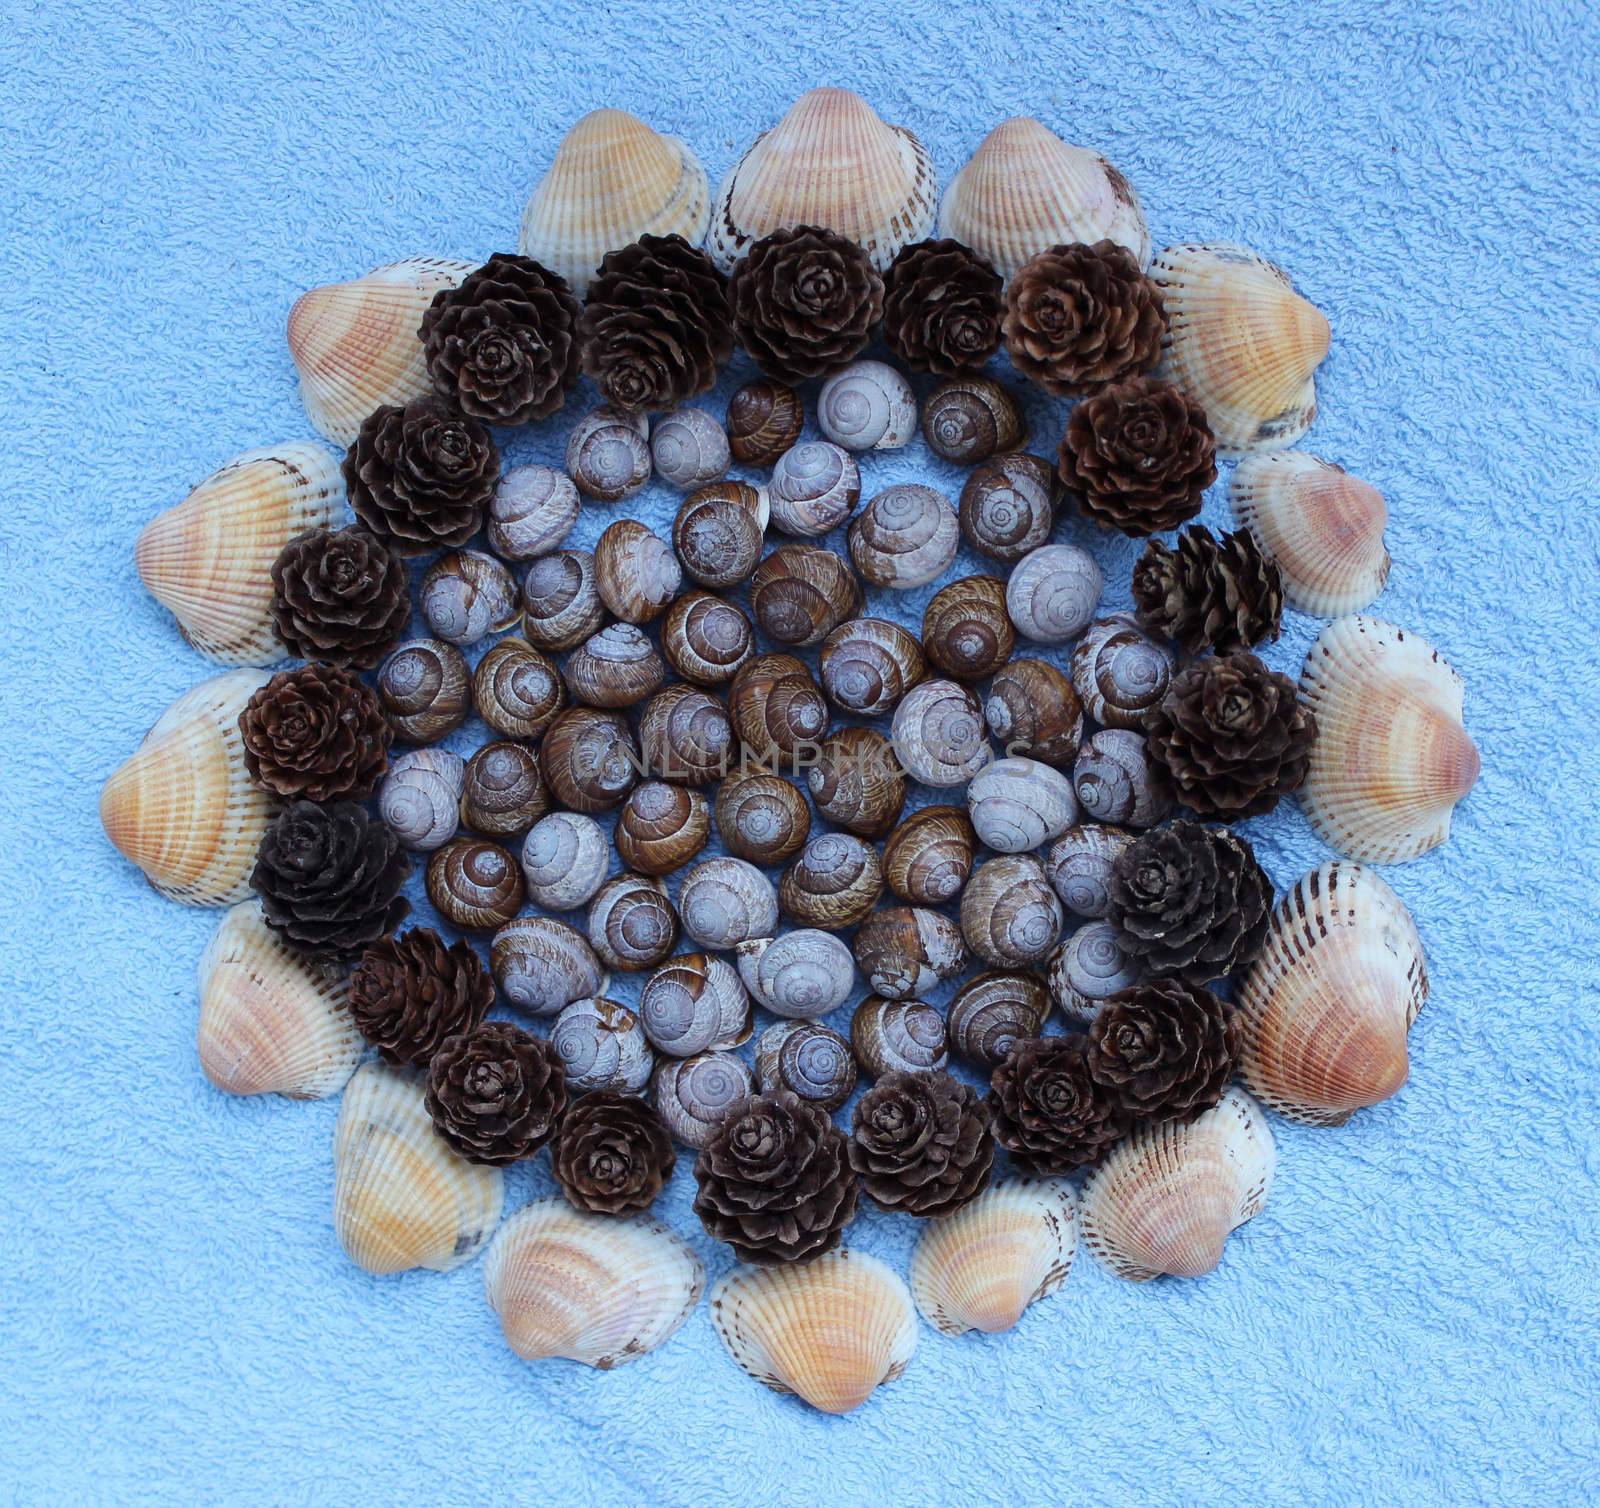 Decoration of shells of snails found in the Gatchina park, pine cones from Karelia and seashells from Arabian Sea.